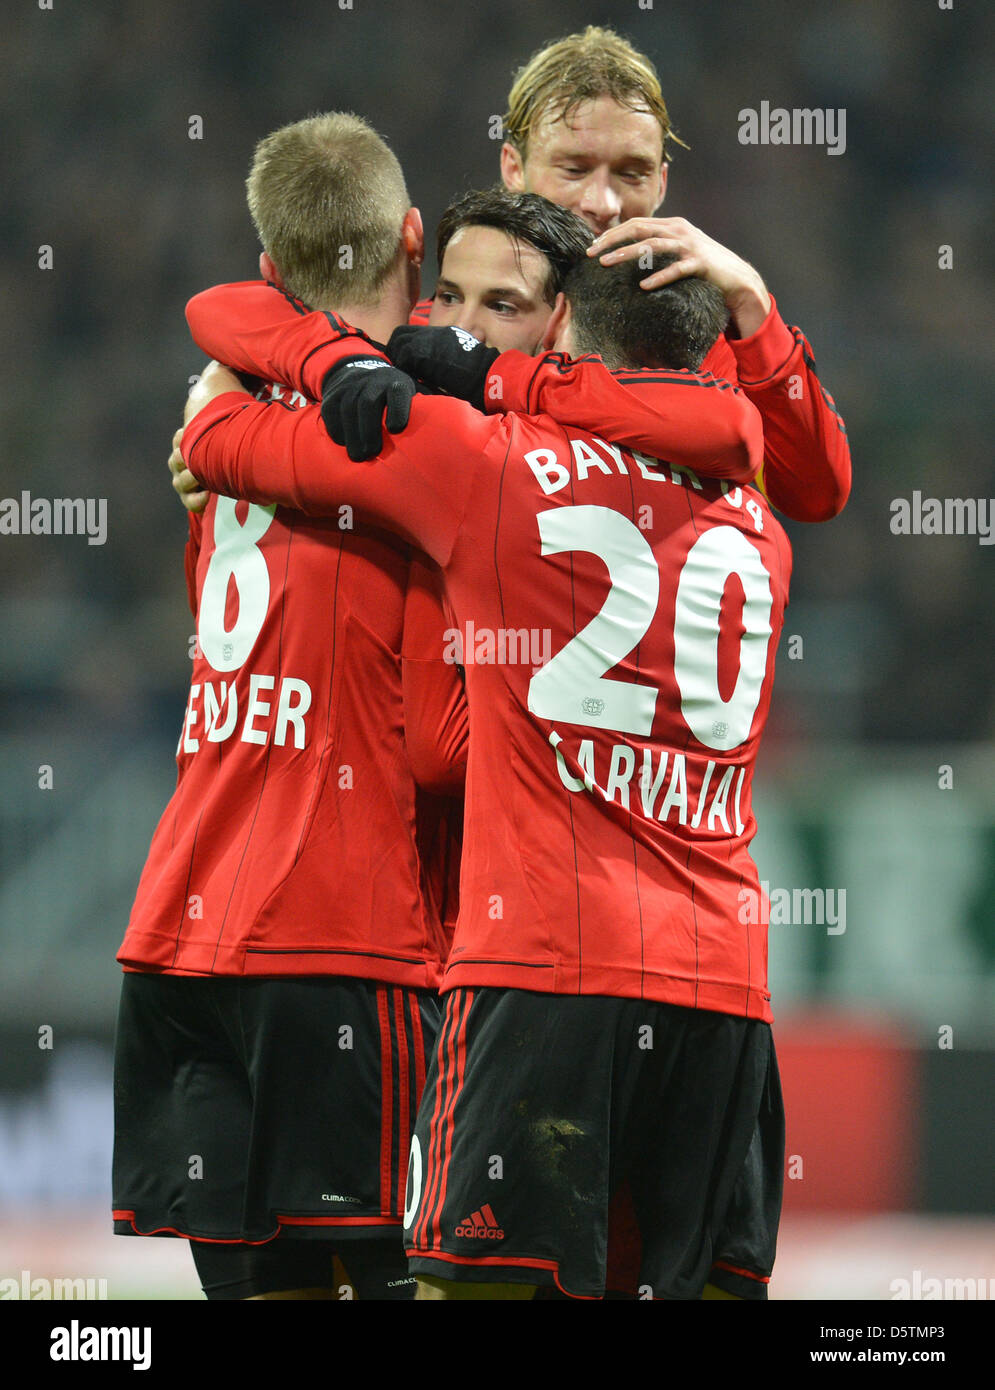 Leverkusen's Lars Bender (L), Simon Rolfes and Daniel Carvajal celebrate the 1-0 goal with goal scorer Gonzalo Castro during the German Bundesliga soccer match between Werder Bremen and Bayer Leverkusen at Weser Stadium in Bremen, Germany, 28 November 2012. Photo: CARMEN JASPERSEN  (ATTENTION: EMBARGO CONDITIONS! The DFL permits the further utilisation of up to 15 pictures only (no Stock Photo